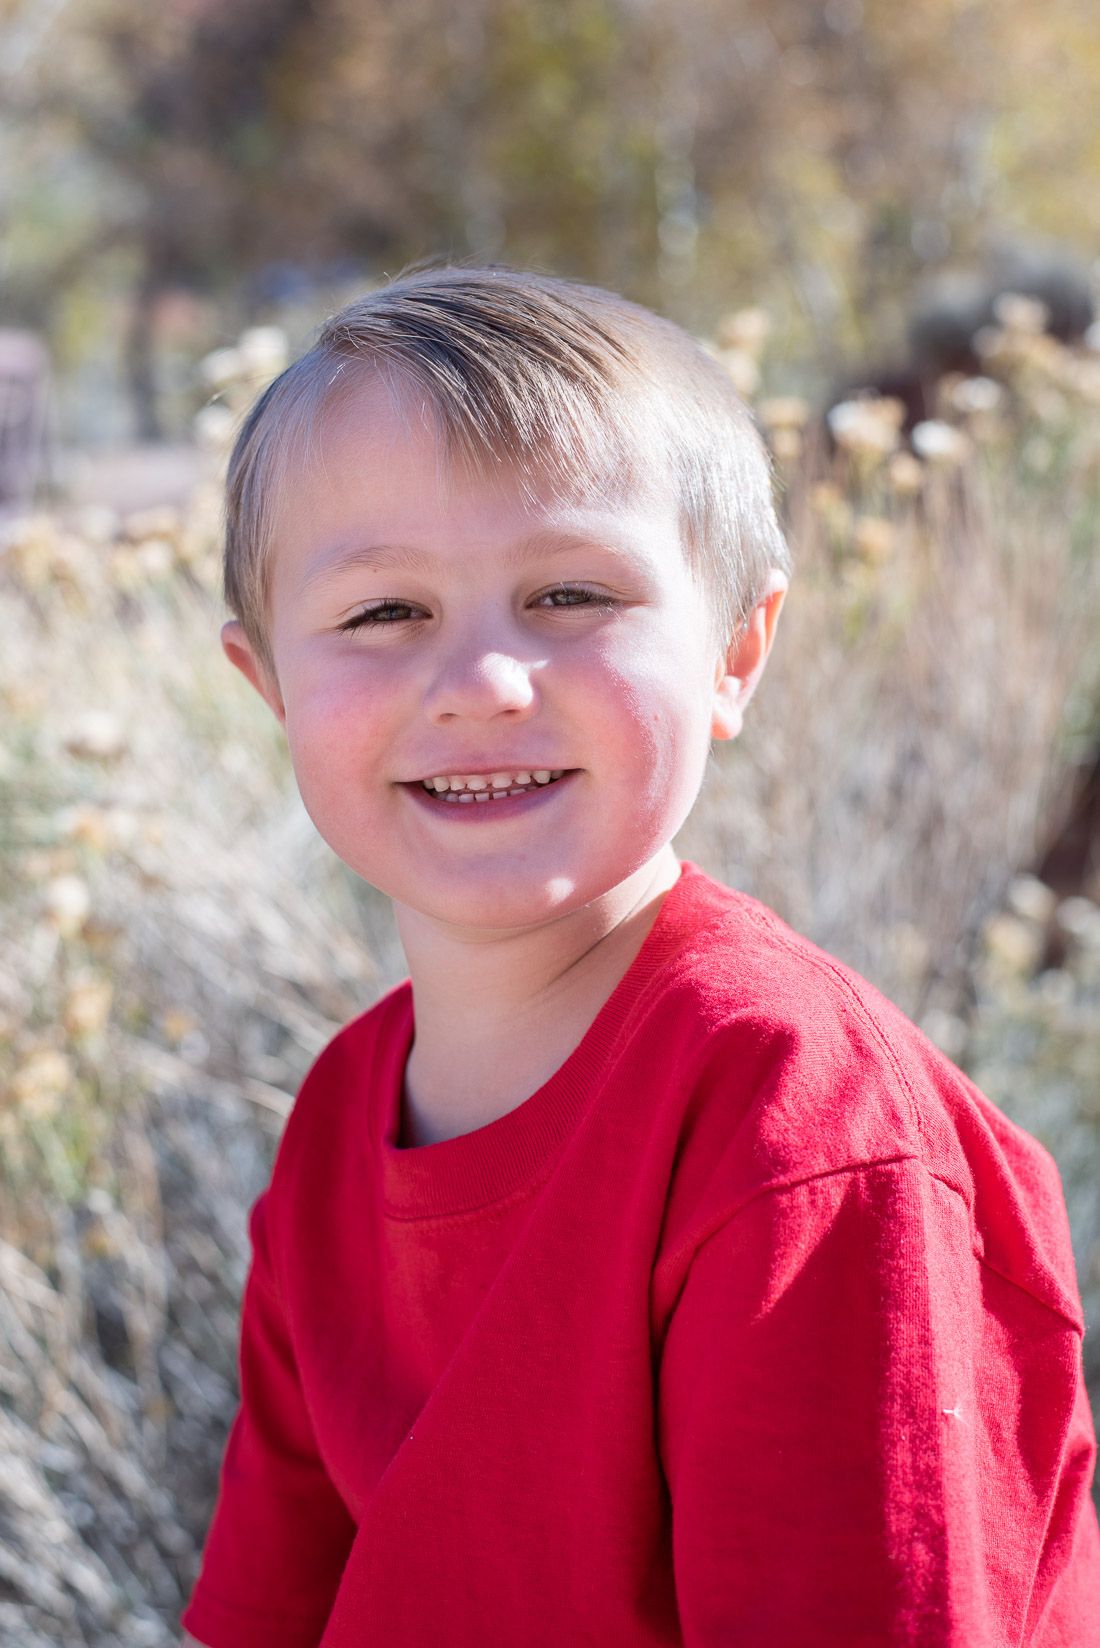 Boy in red shirt looks at camera and smiles-Bethany Allen Photography